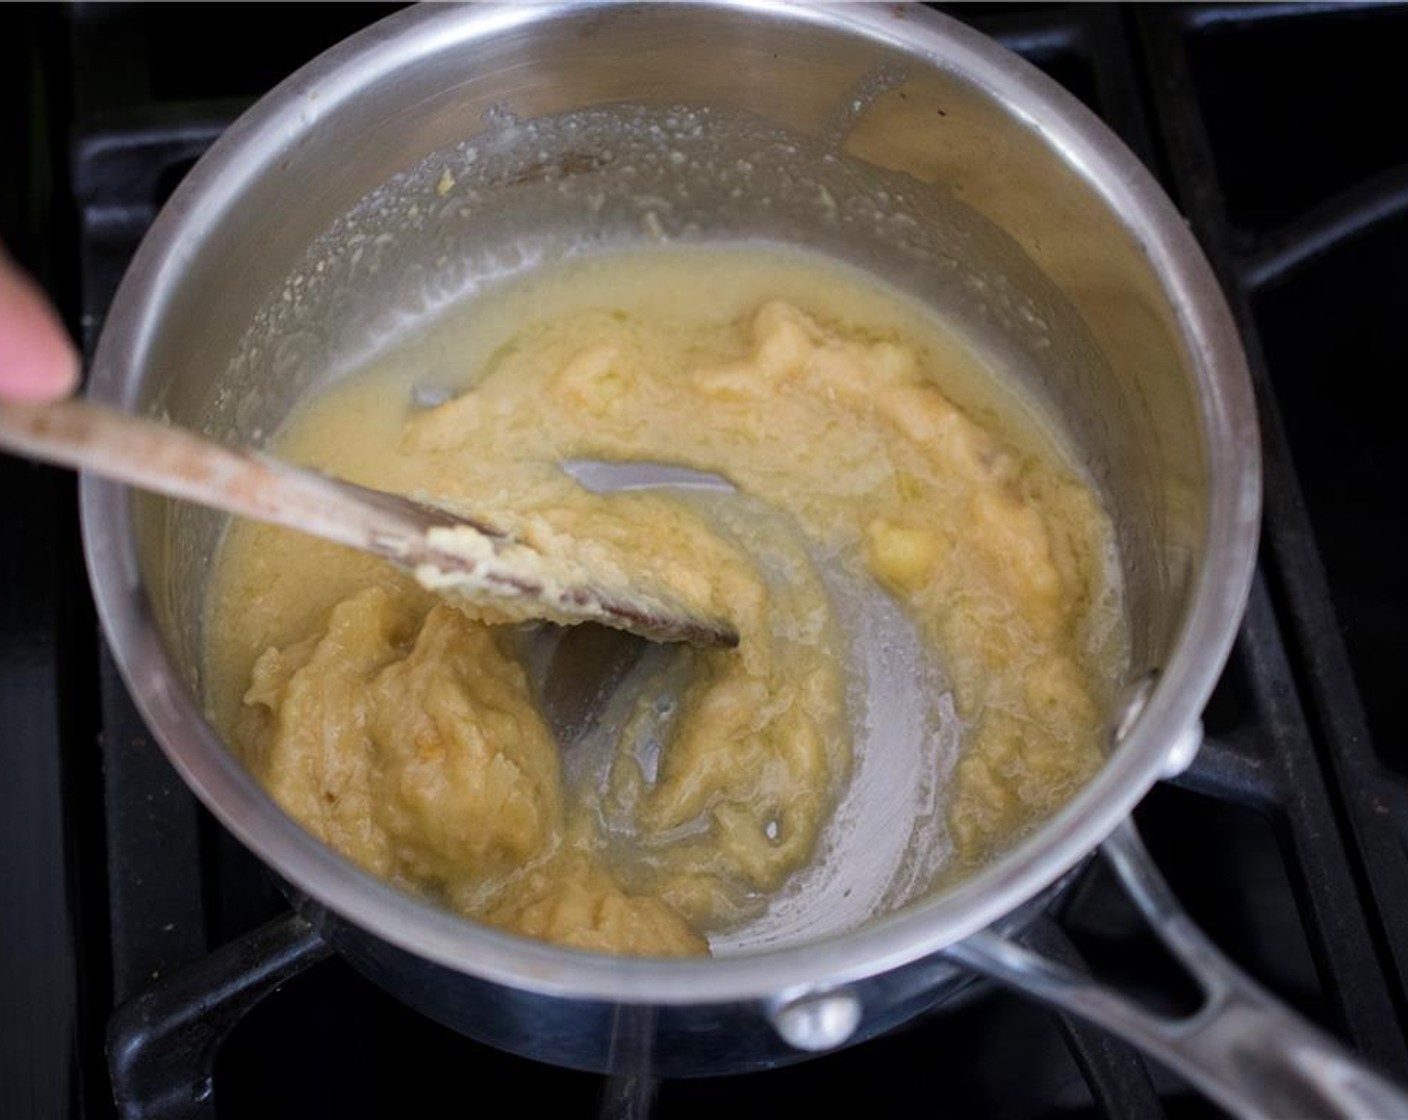 step 6 In a small sauce pan over medium heat, warm 1 tbsp of the Rice Vinegar (2 Tbsp) for a minute. Turn the heat to low and add half of the roasted garlic – miso butter.  Stir until warmed through, but not melted. Set aside and keep warm.